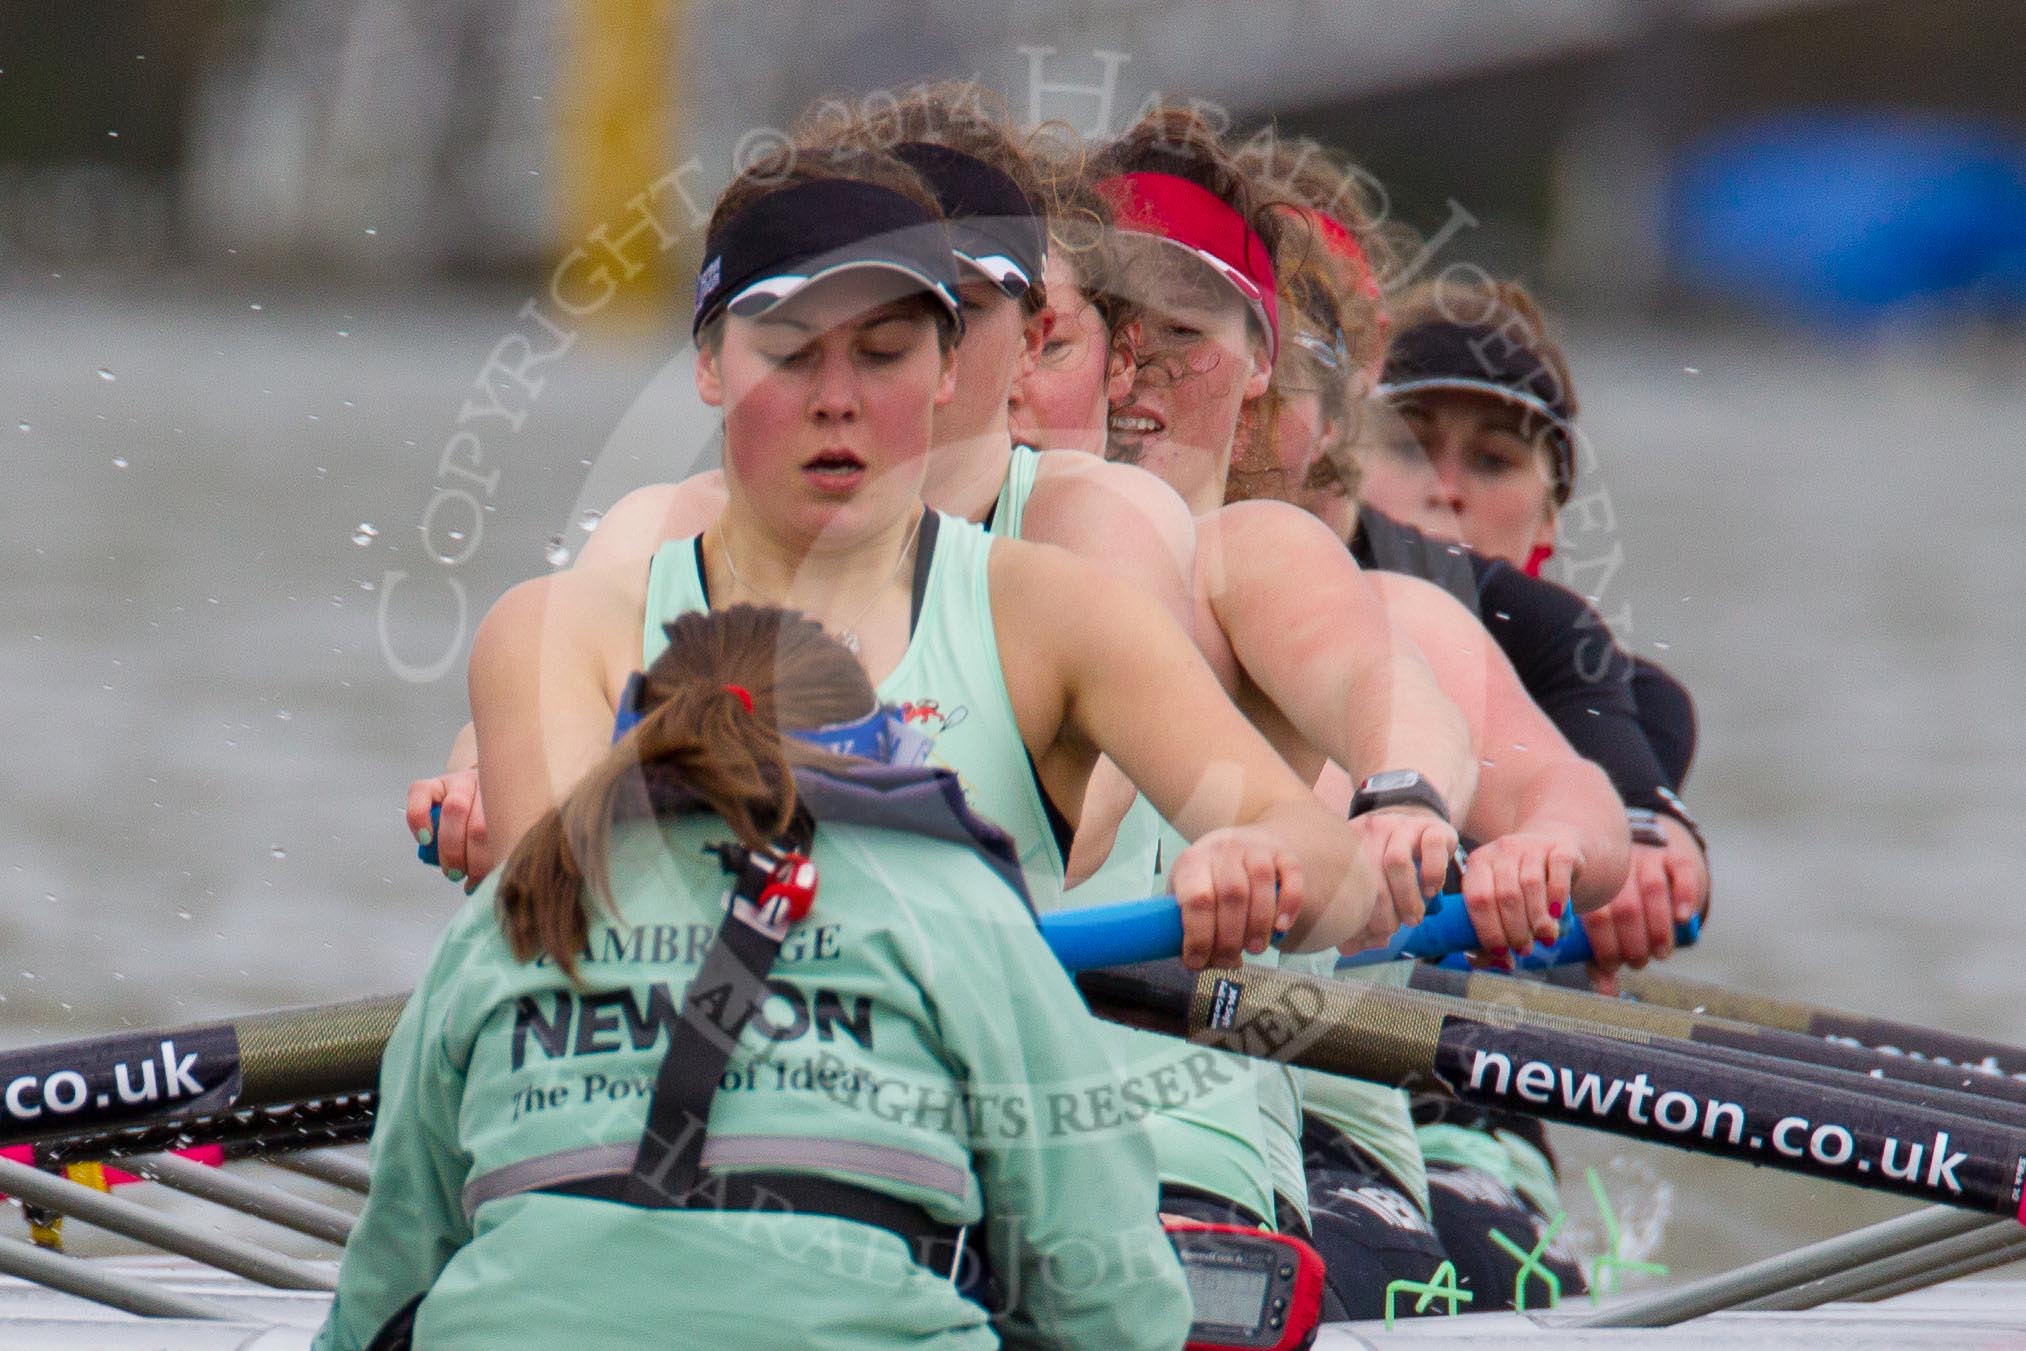 The Boat Race season 2014 - fixture CUWBC vs Thames RC.




on 02 March 2014 at 13:15, image #98